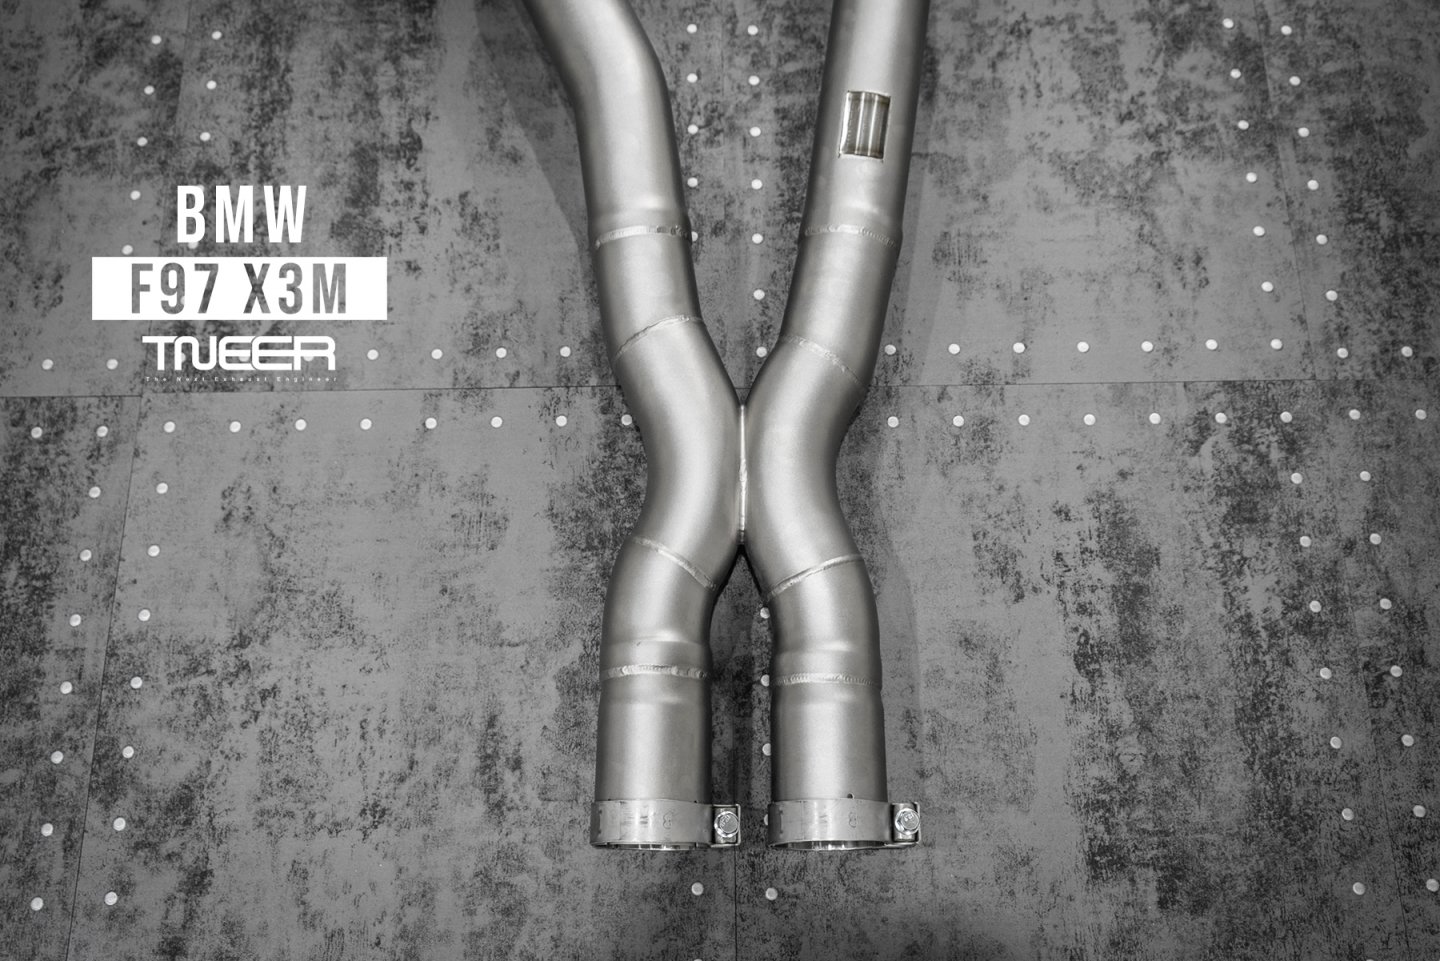 BMW F97 (X3M) Competition TNEER Downpipes